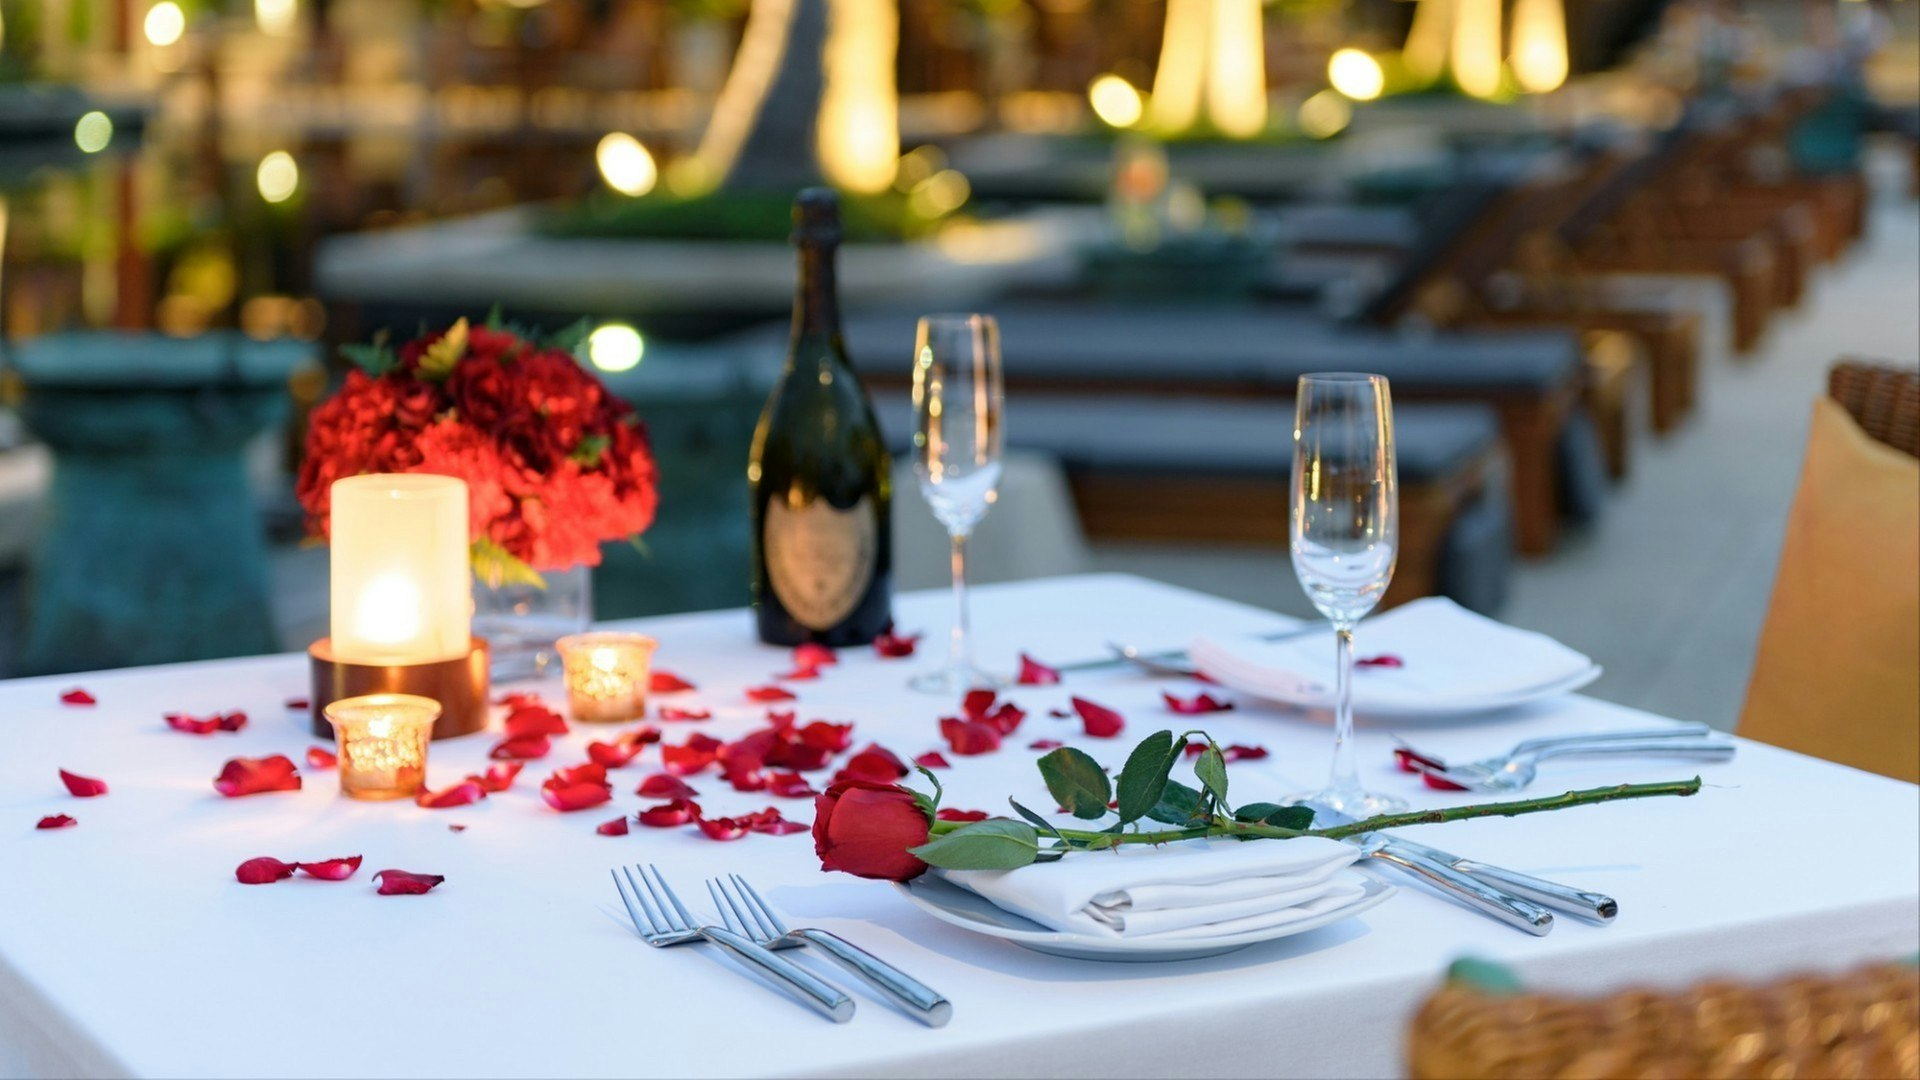 Pool side Candlelight Dinner and Romantic Sunset Dining table